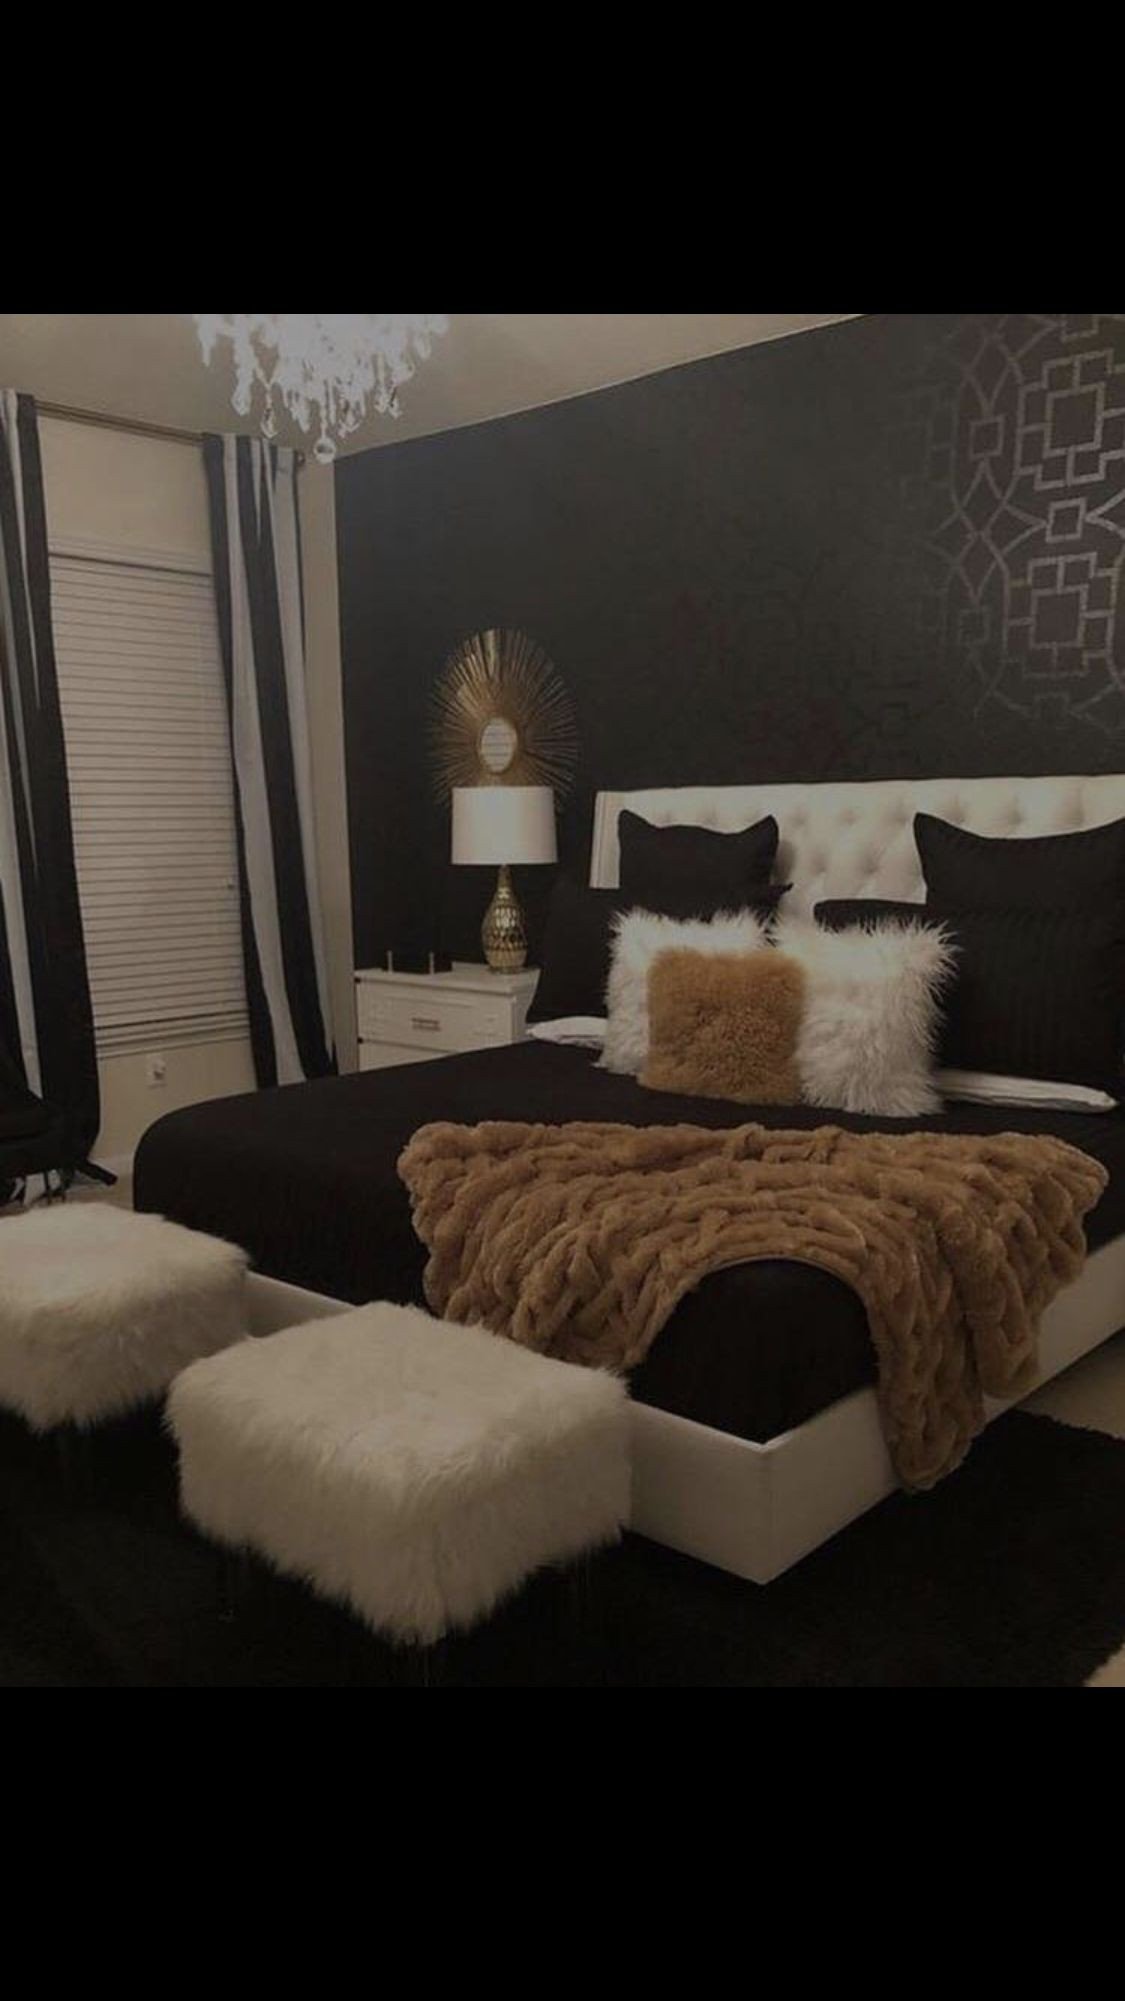 Black and Gold Bedroom Lovely Pin by Amour Kiiyah ð¤ On Home Decorating In 2019